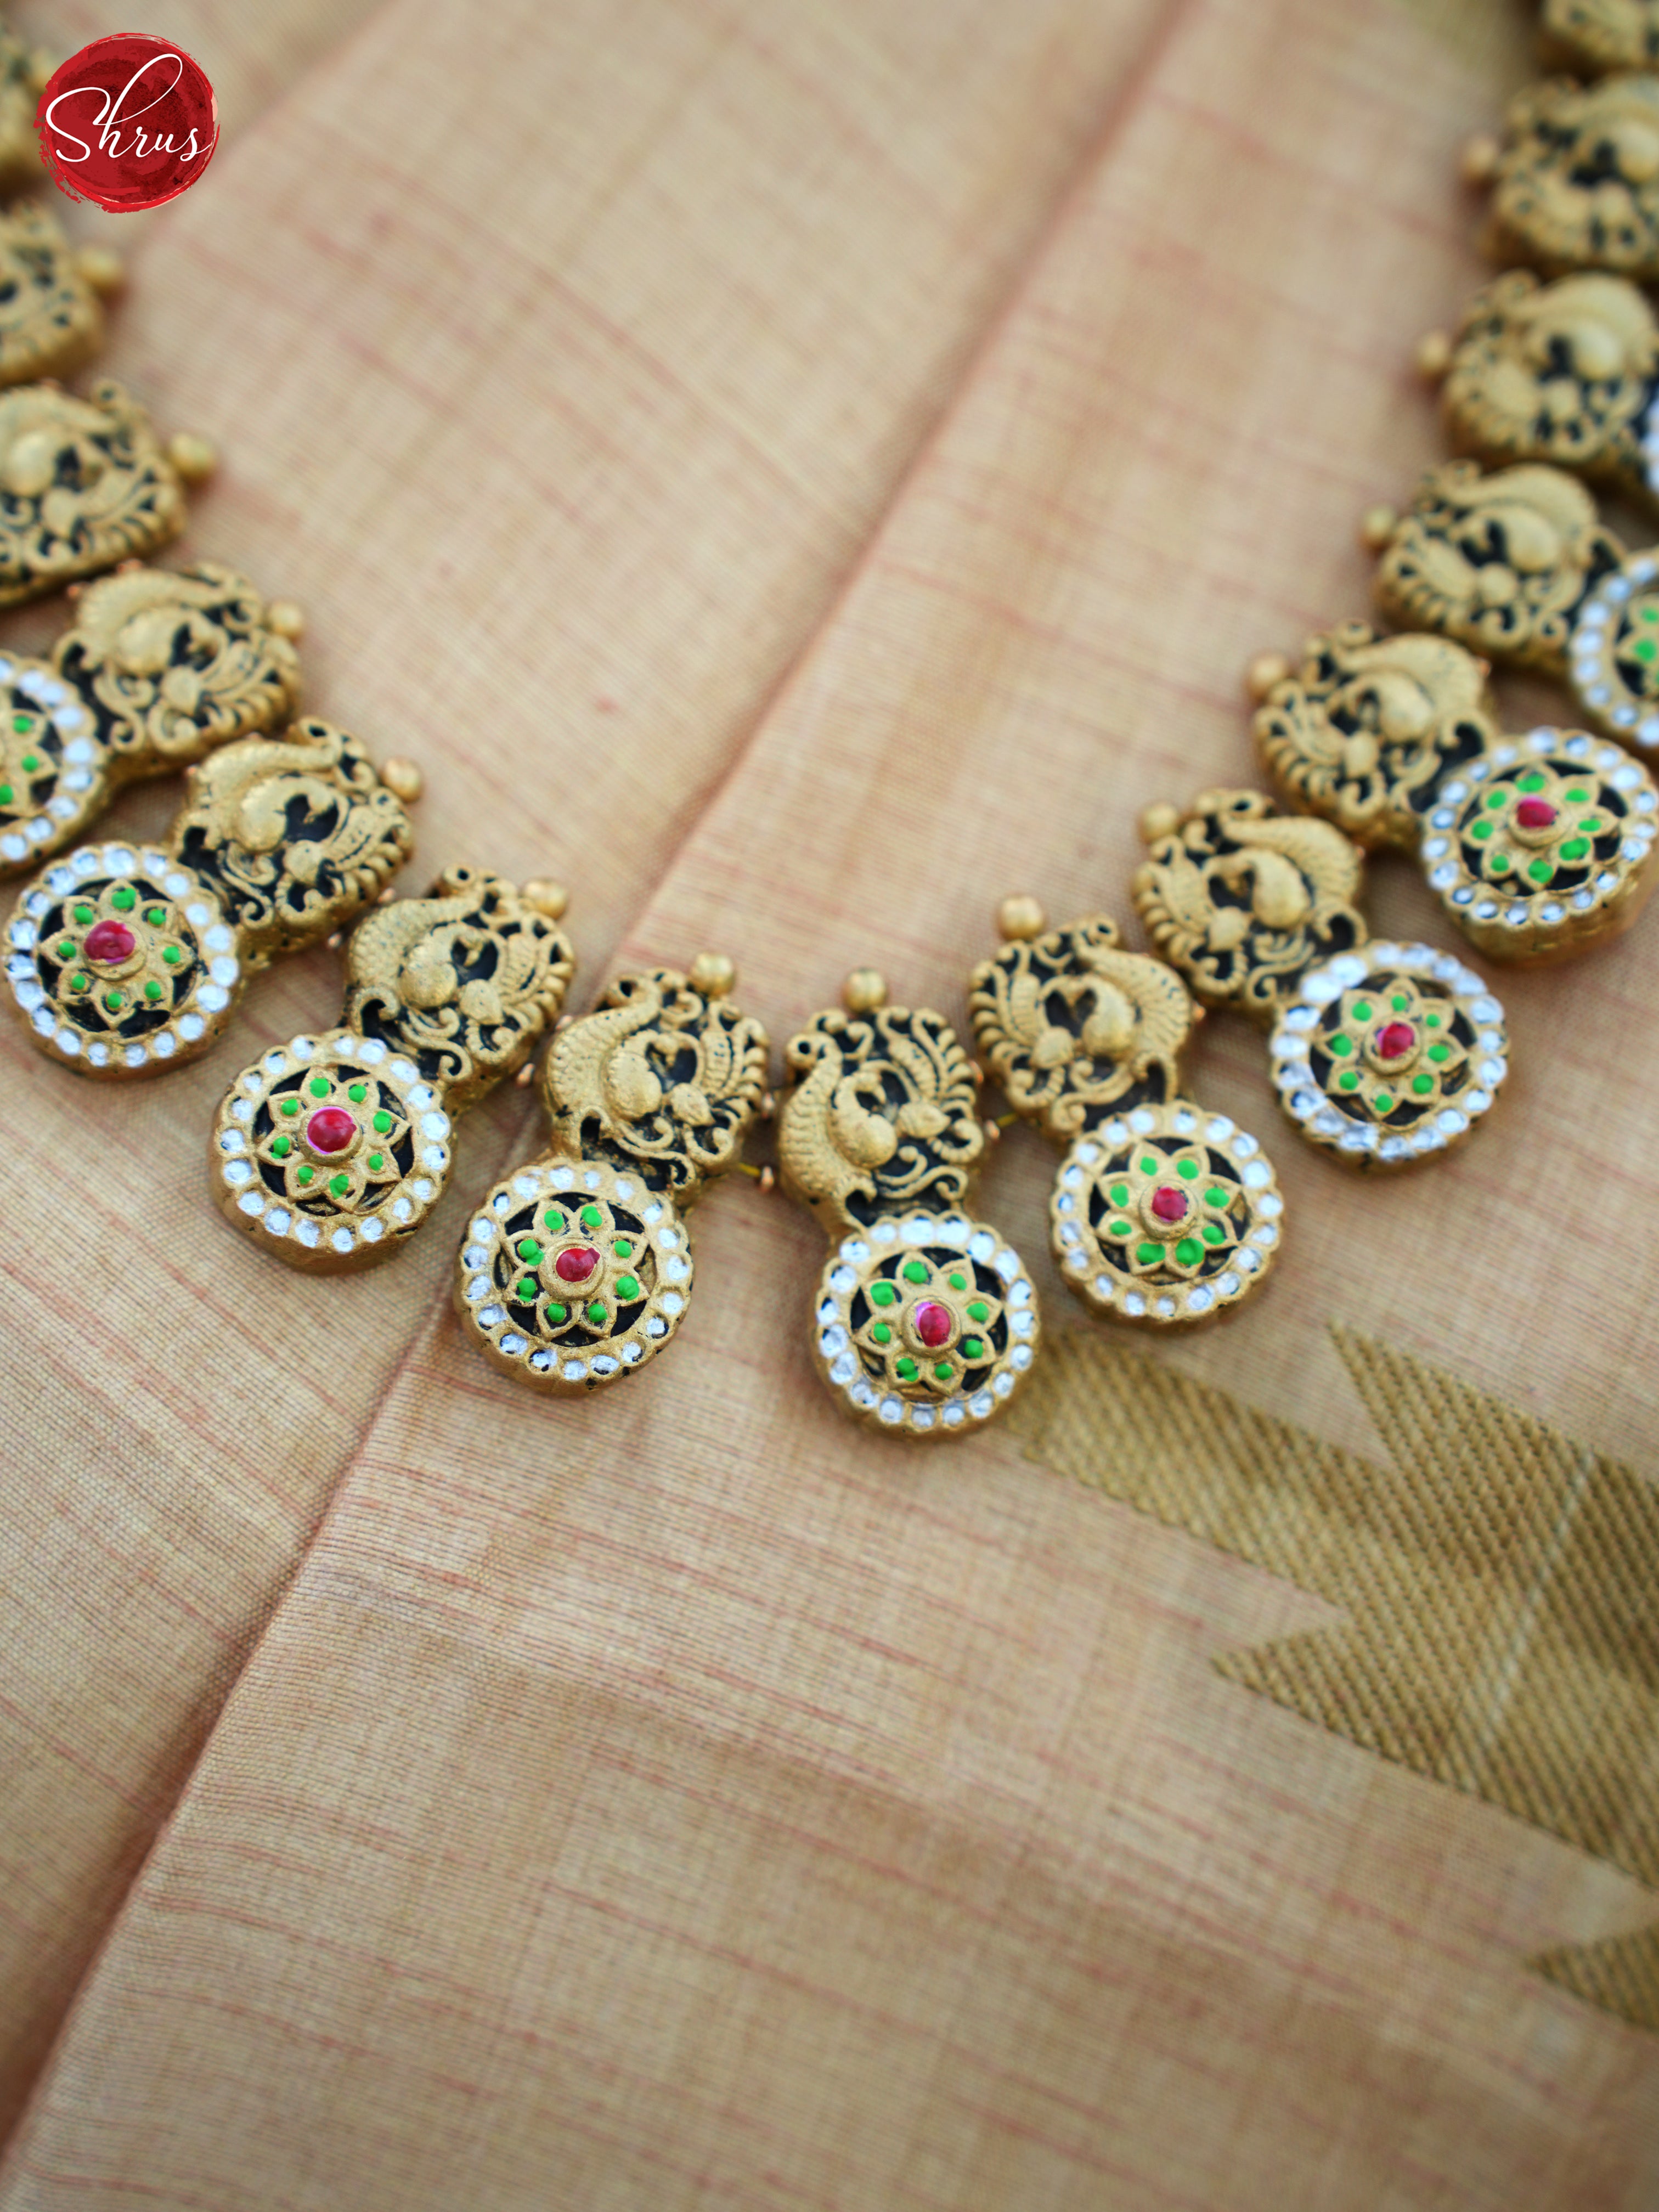 Handcrafted Peacock Terra cotta necklace with Jhumkas- Accessories - Shop on ShrusEternity.com